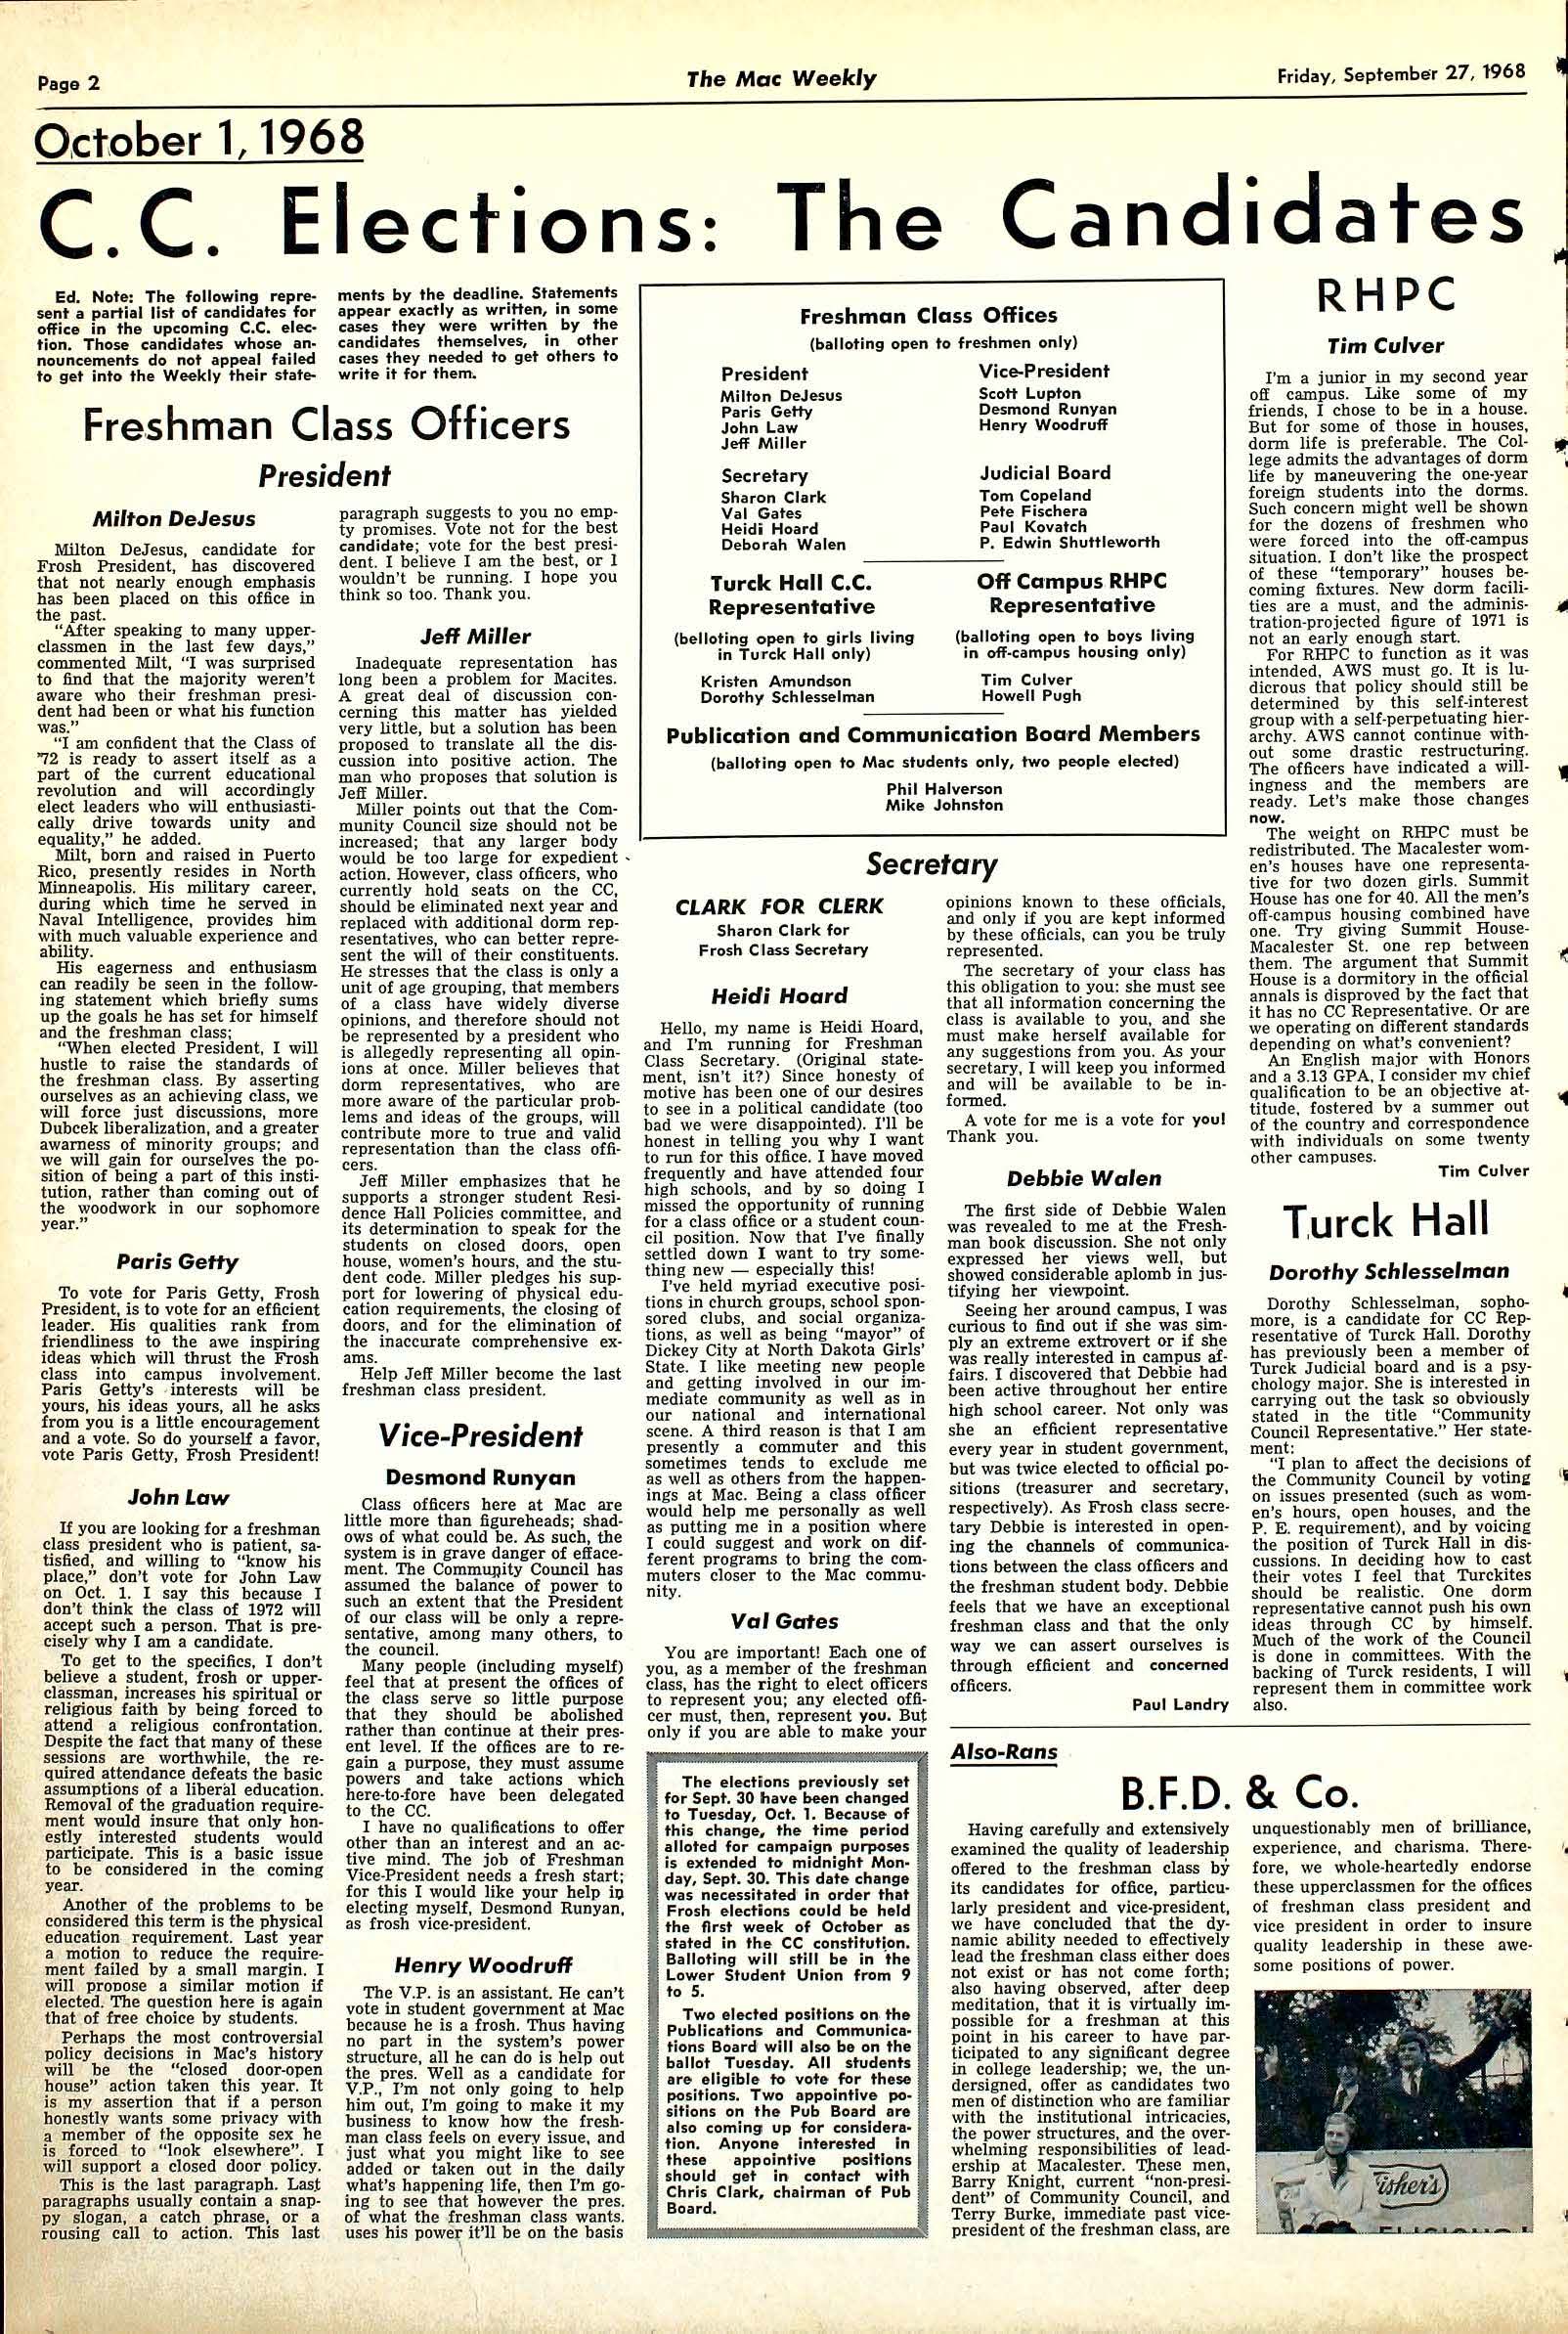 The Mac Weekly, September 27, 1968. Freshman Class Elections.